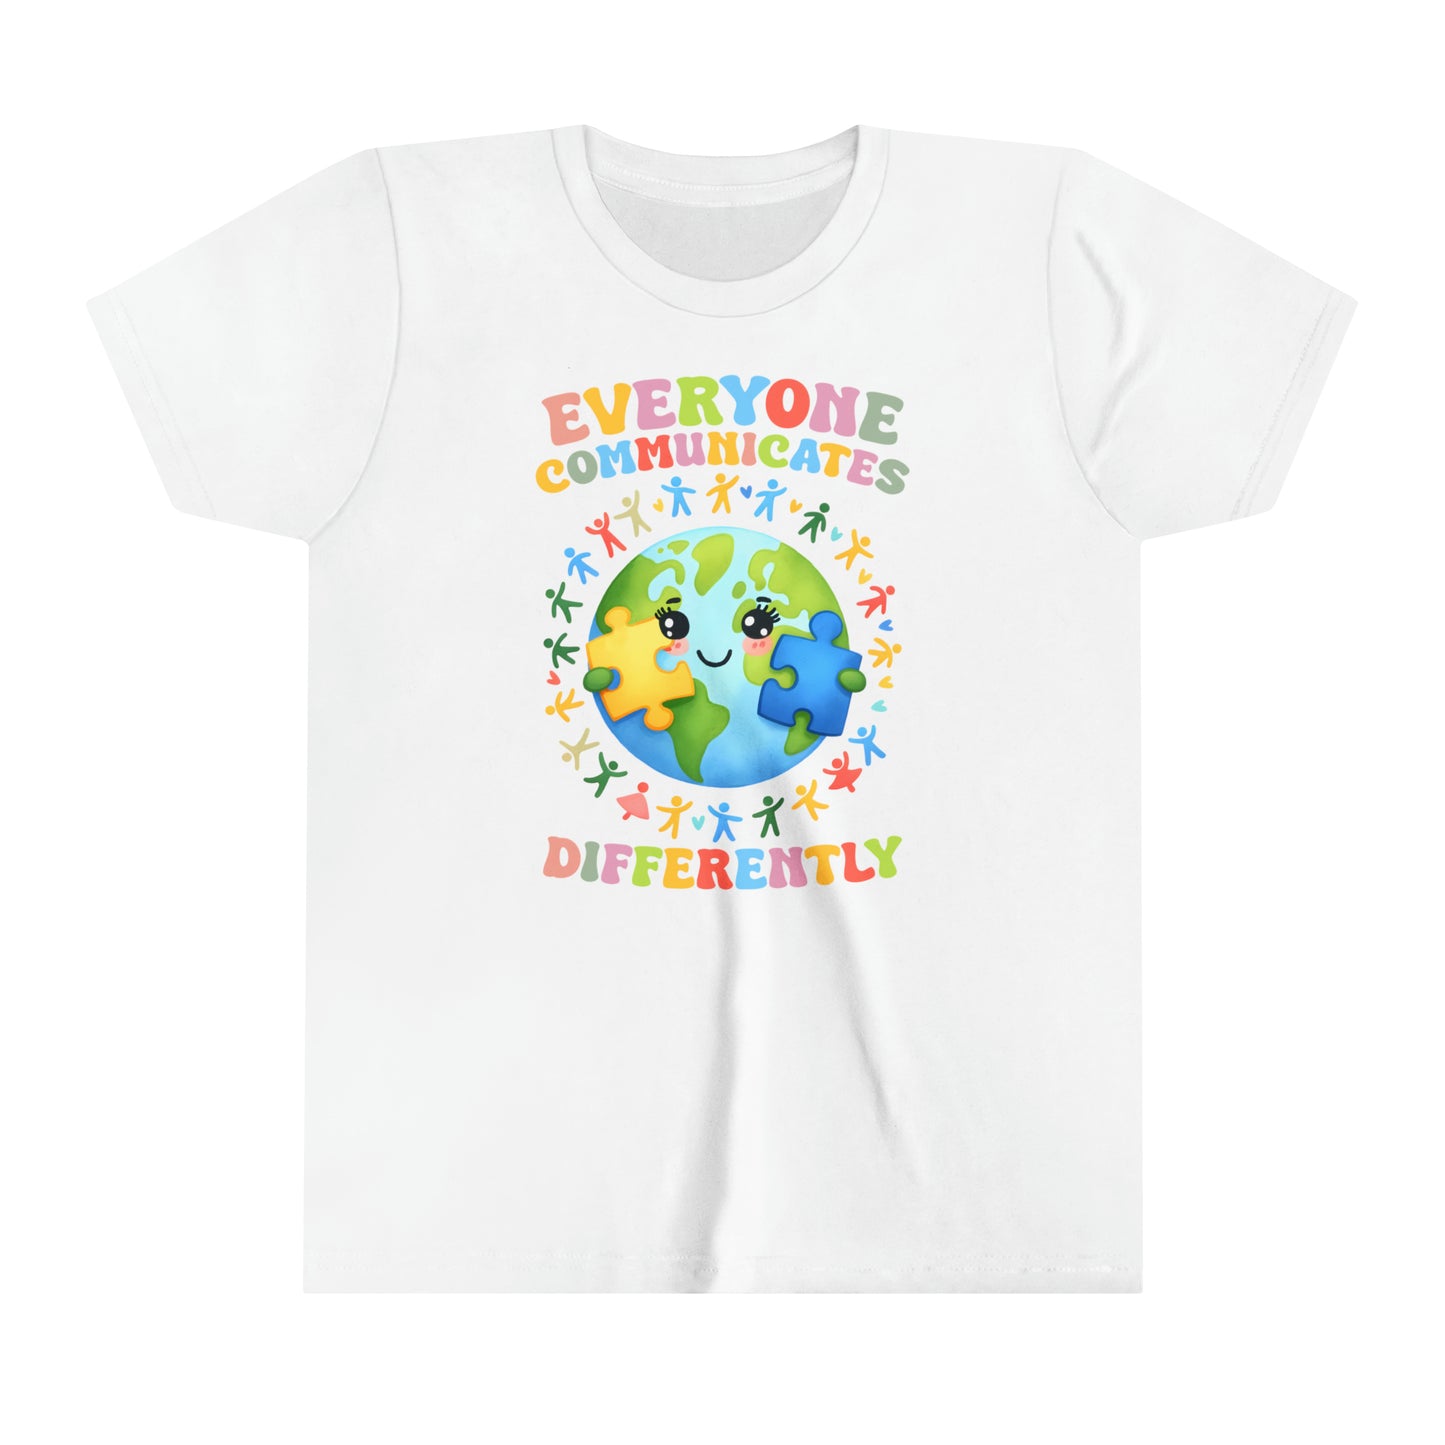 Everyone Communicates Differently Autism Advocate Youth Shirt